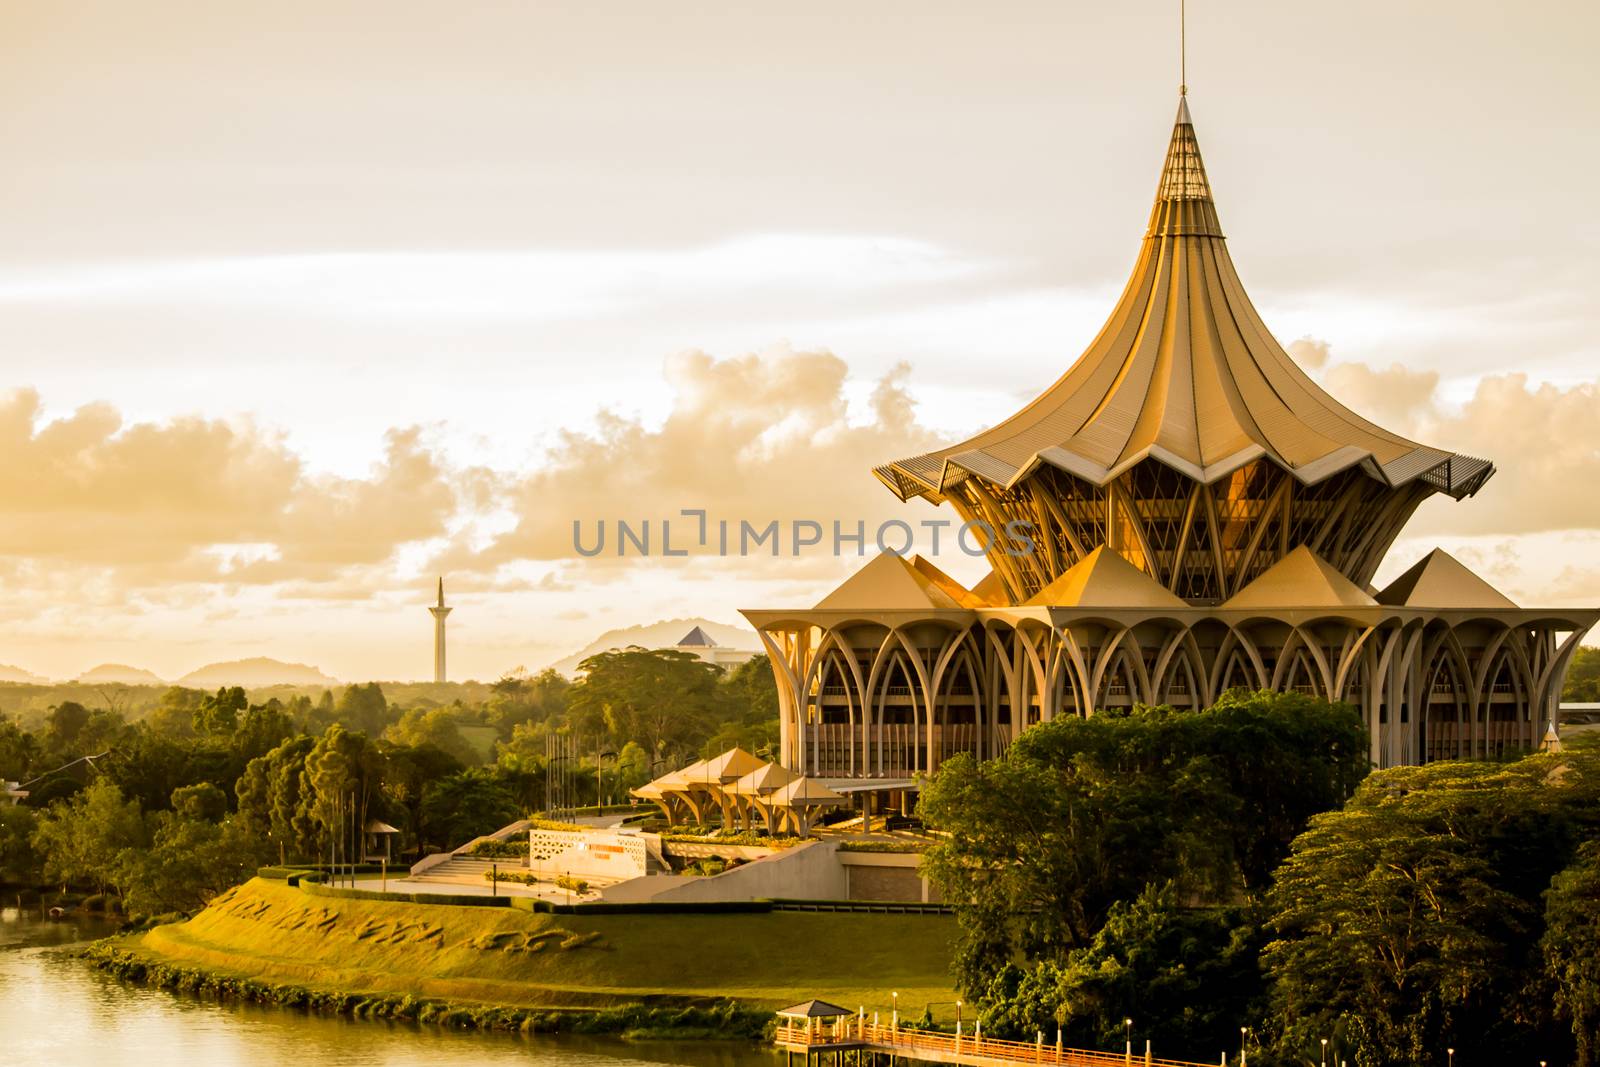 View of the Esplanade on the riverside in Kuching, Malaysia - Borneo during sunset.